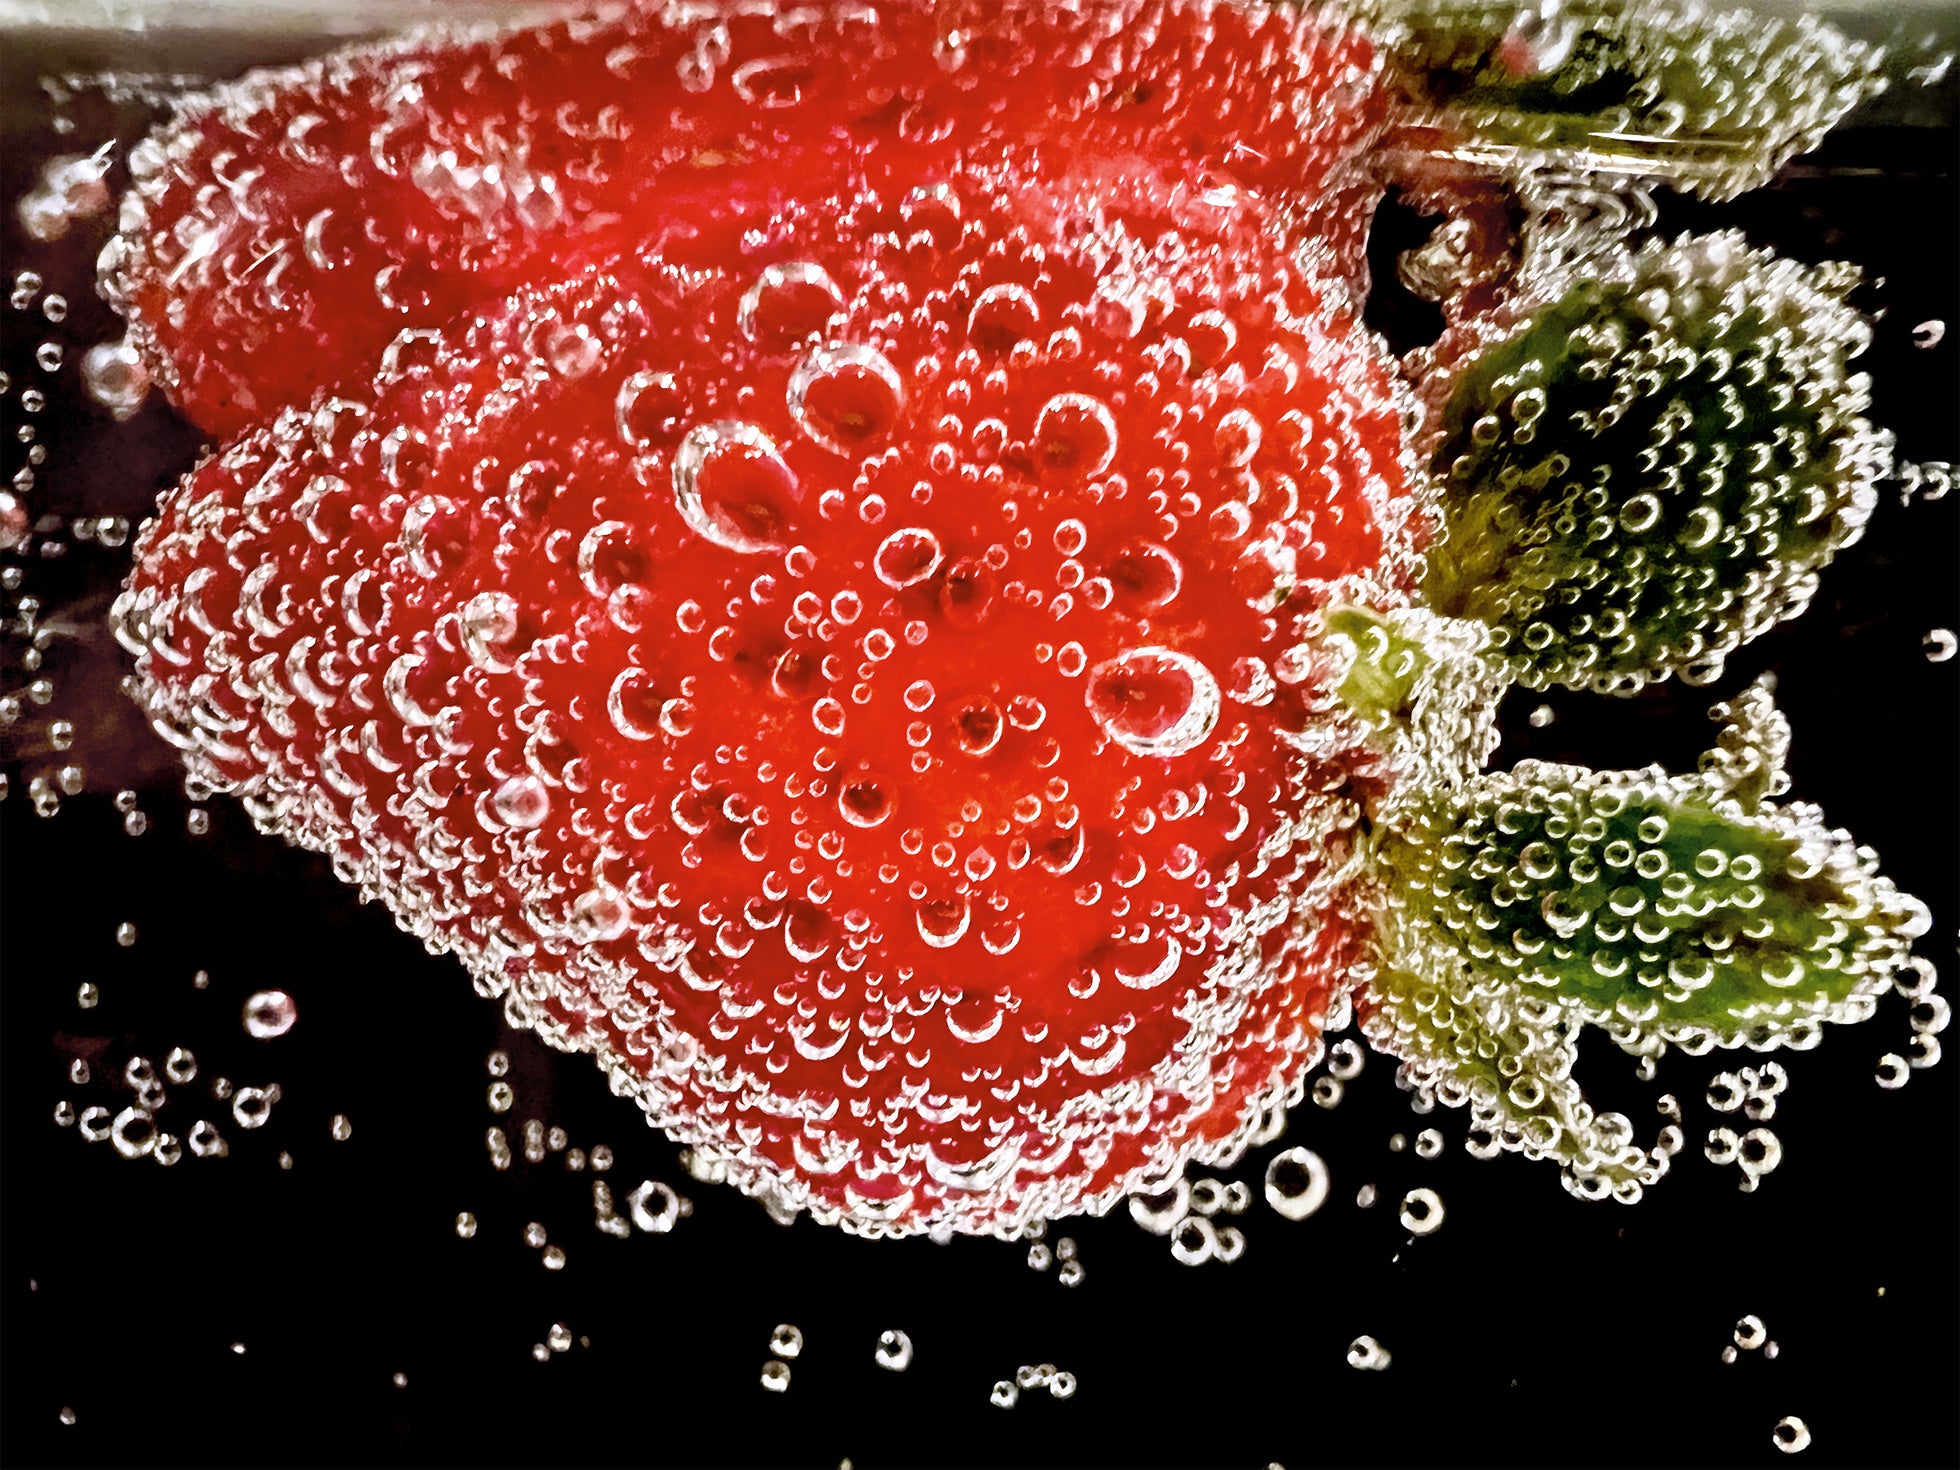 iPhone 13 Pro (Photo: “Strawberry in Soda” by Ashley Lee)